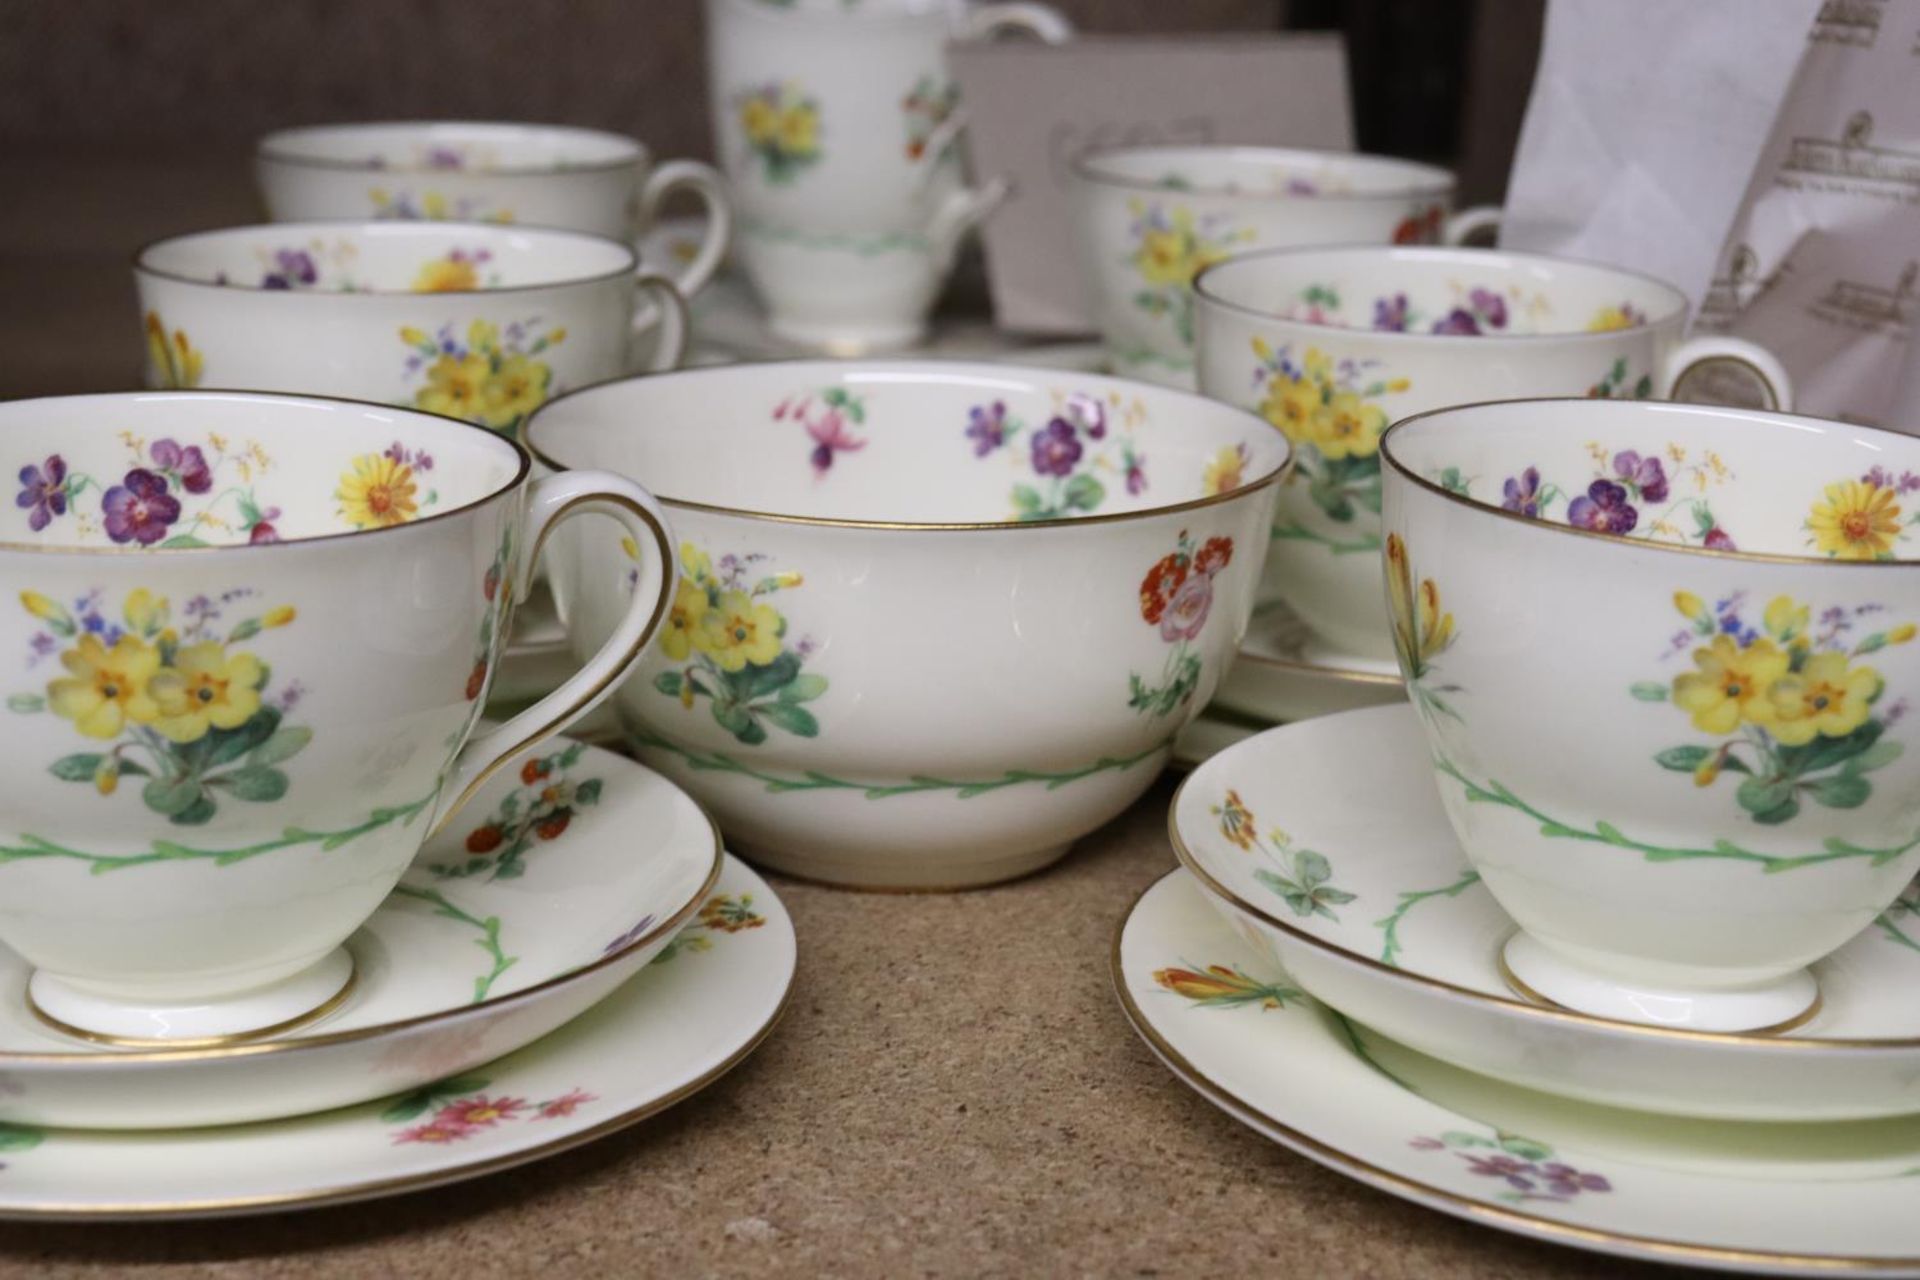 A VINTAGE ROYAL DOULTON TEASET, PALE YELLOW WITH SPRING FLOWERS, TO INCLUDE A CREAM JUG, SUGAR BOWL, - Image 6 of 6